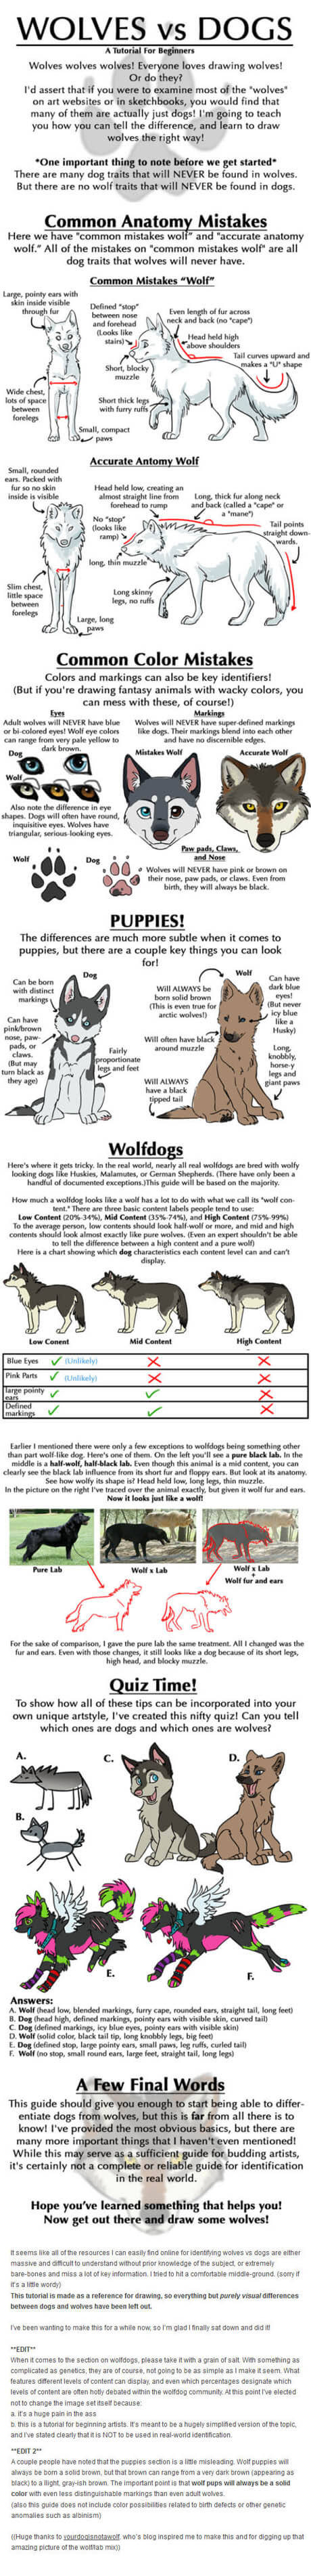 DOG AND WOLF, DOG & WOLF, DOG vs WOLF - THIS INFOGRAPHICS by WWW.MOMO-NO-AWARE.TUMLER.COM !!!